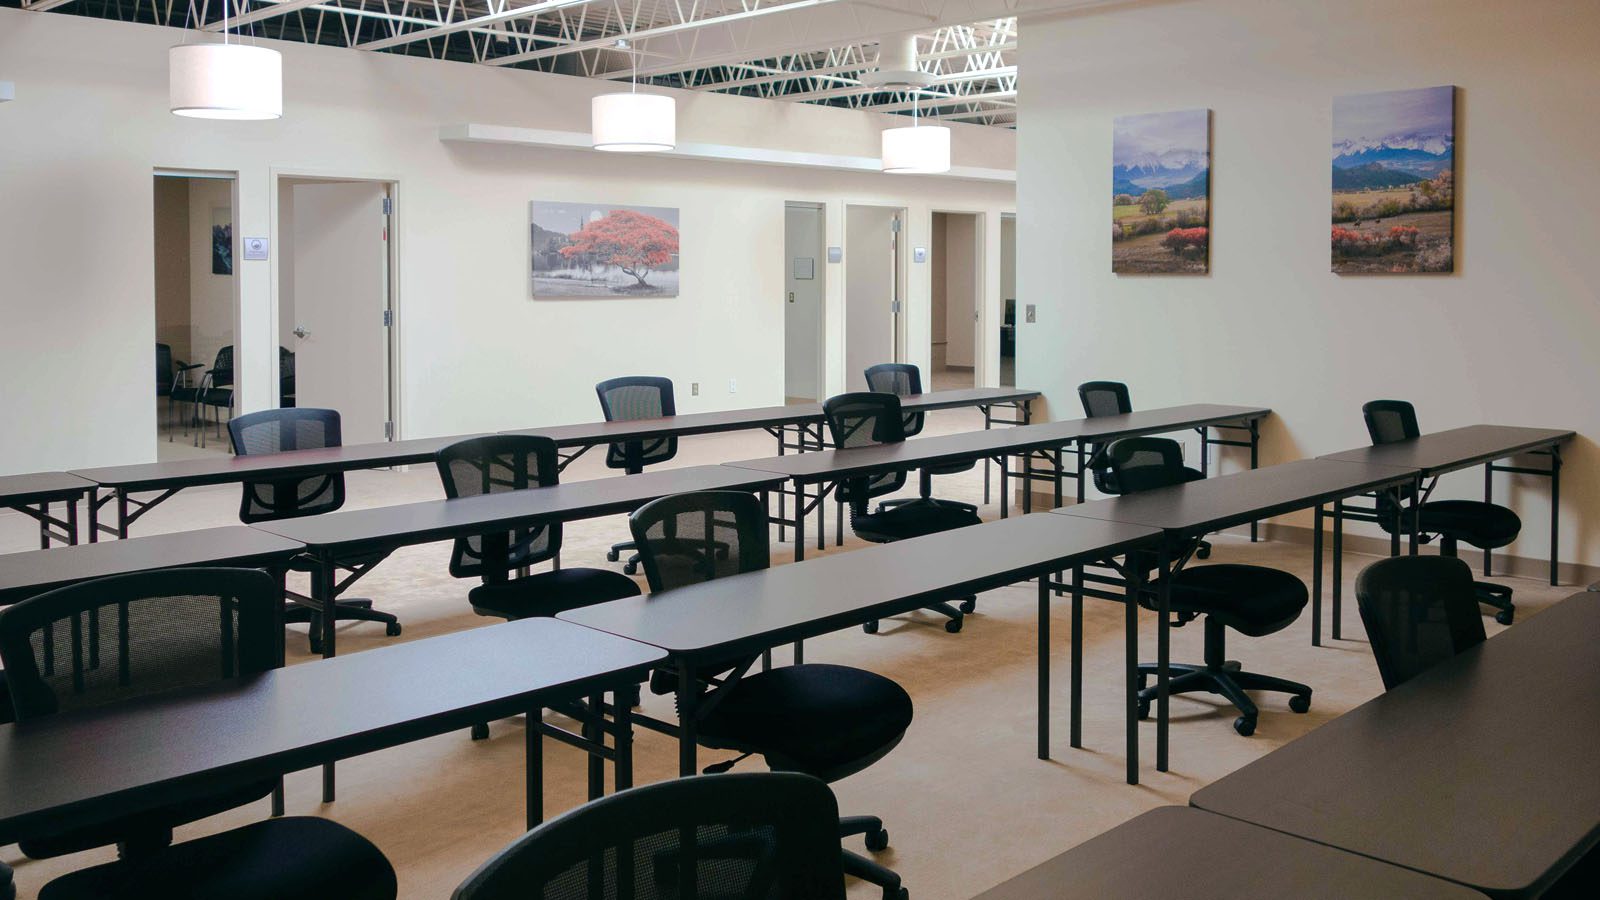 Spacious vocational room at Sandstone Care's Reston Rehab Center with rows of black chairs and desks, adorned with landscape paintings on the wall.